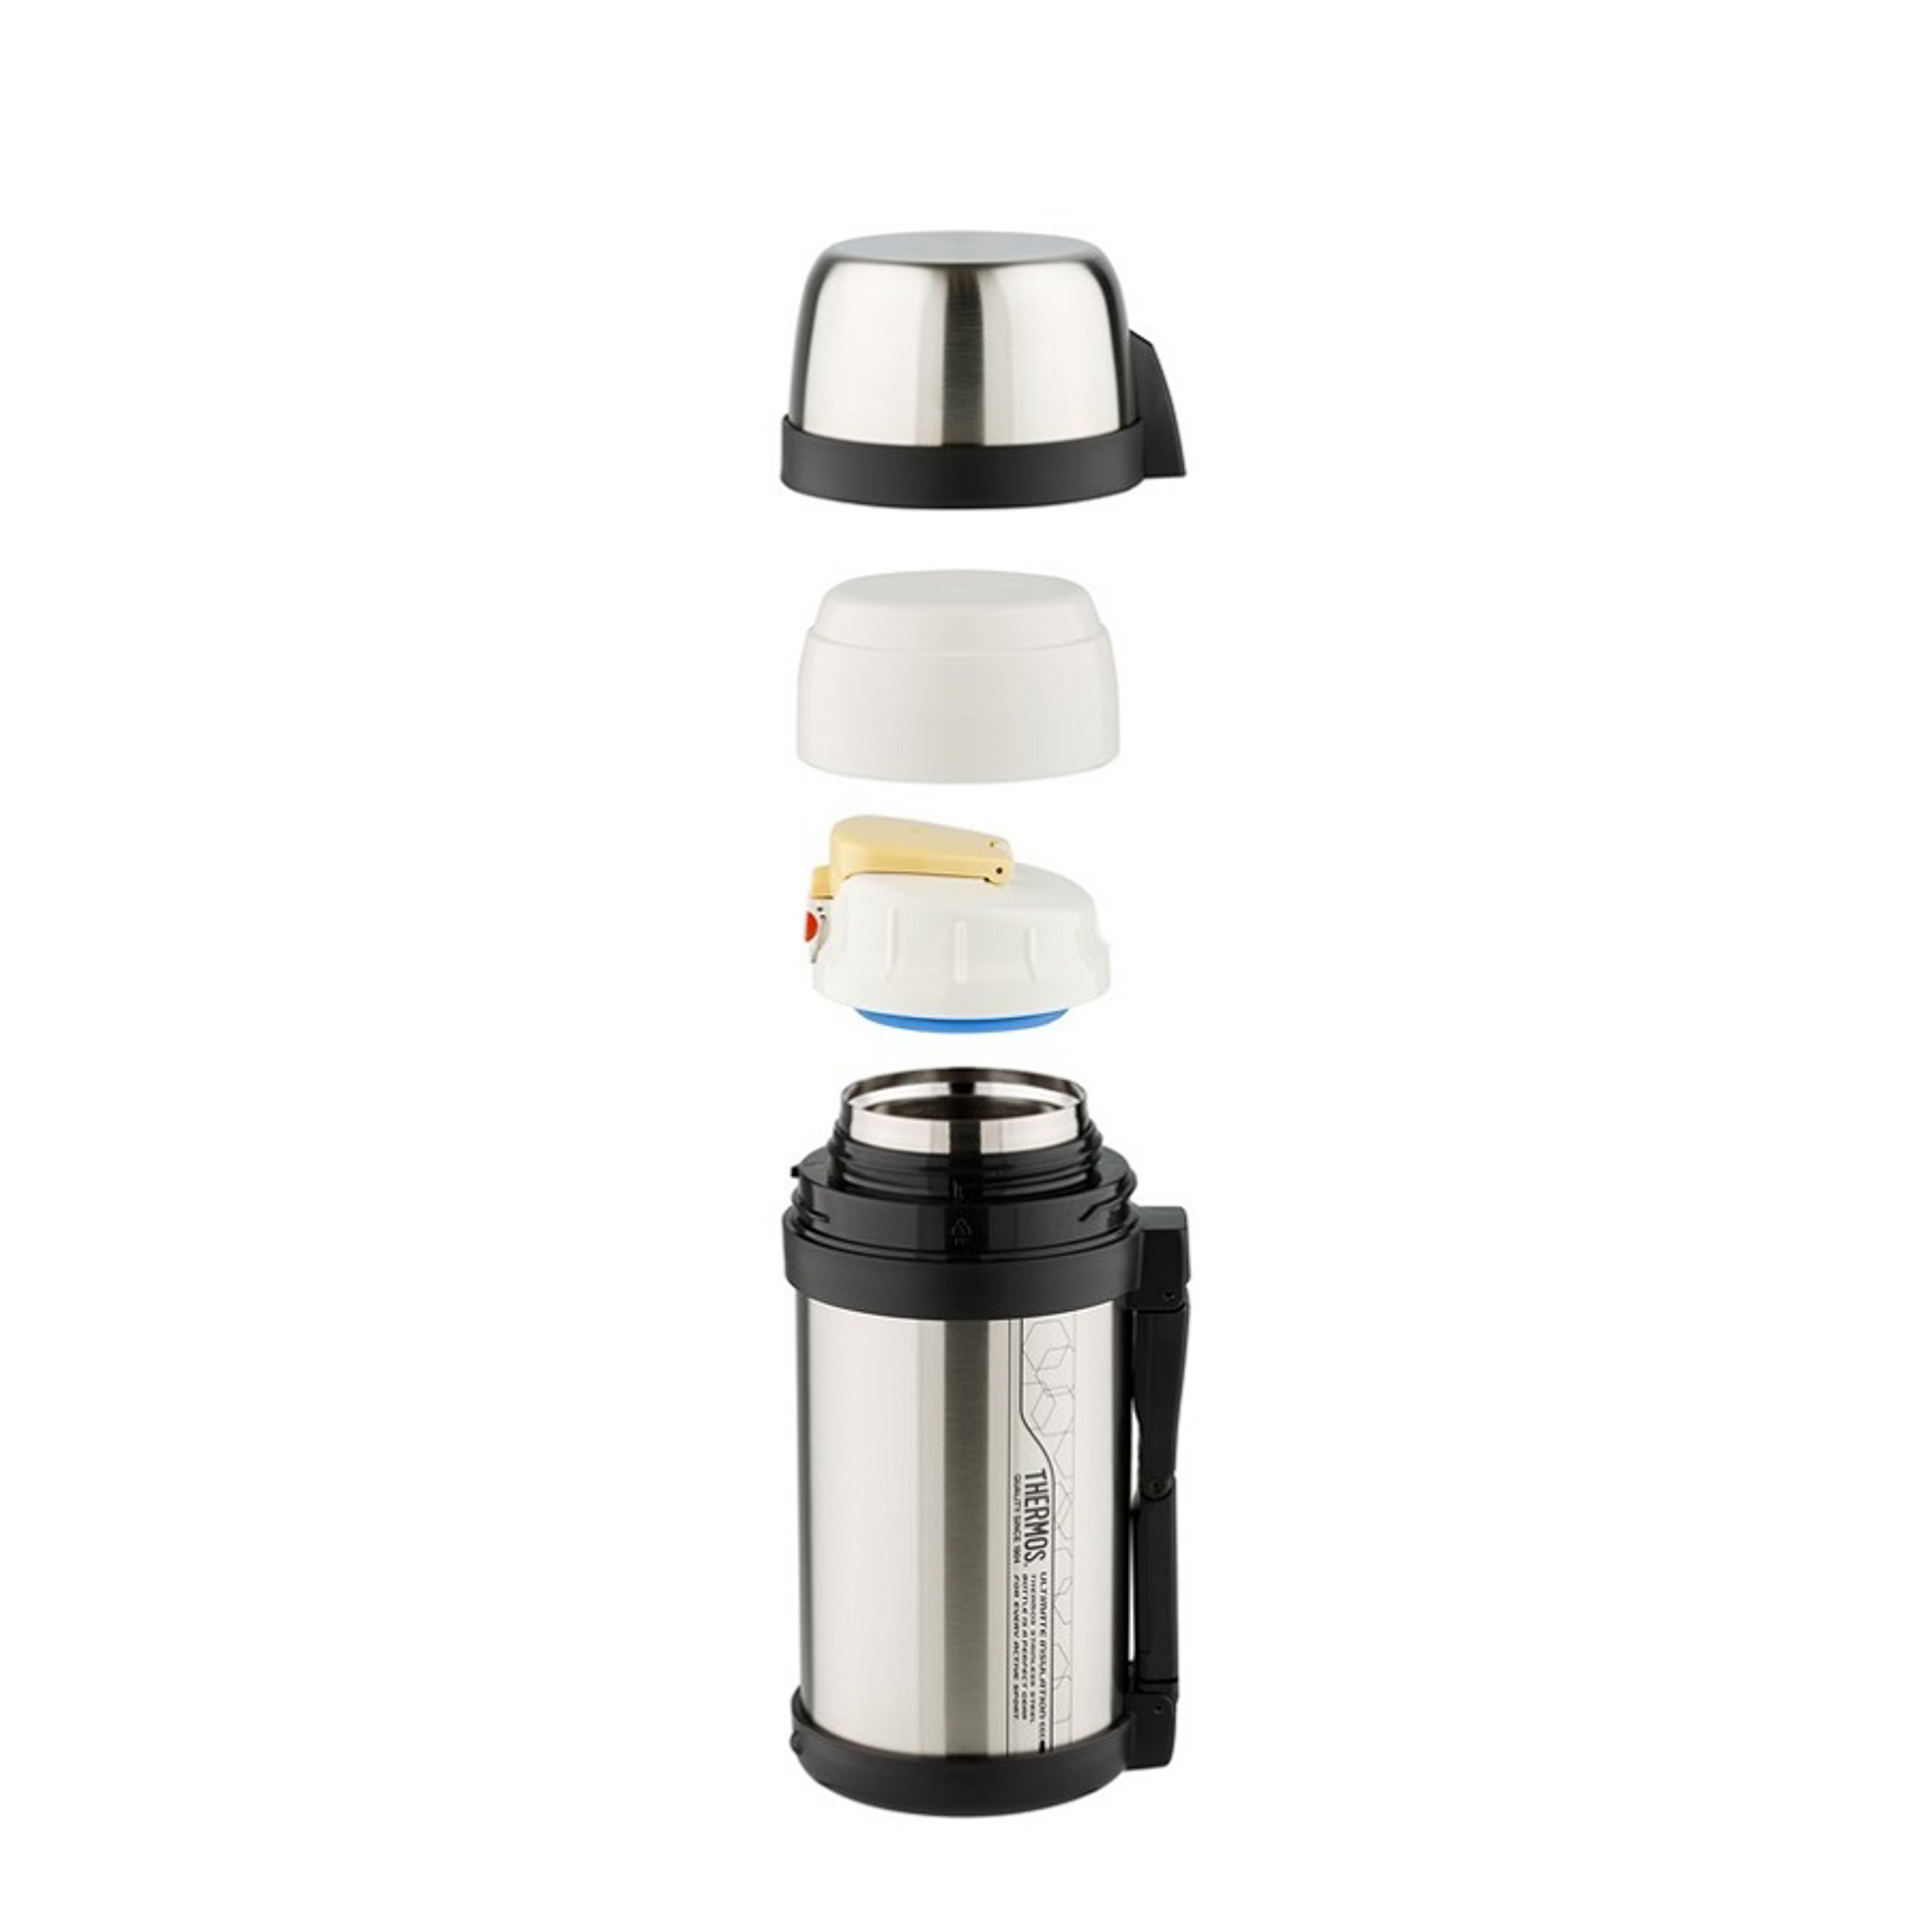 фото Термос thermos fdh stainless steel vacuum flask 1.65л